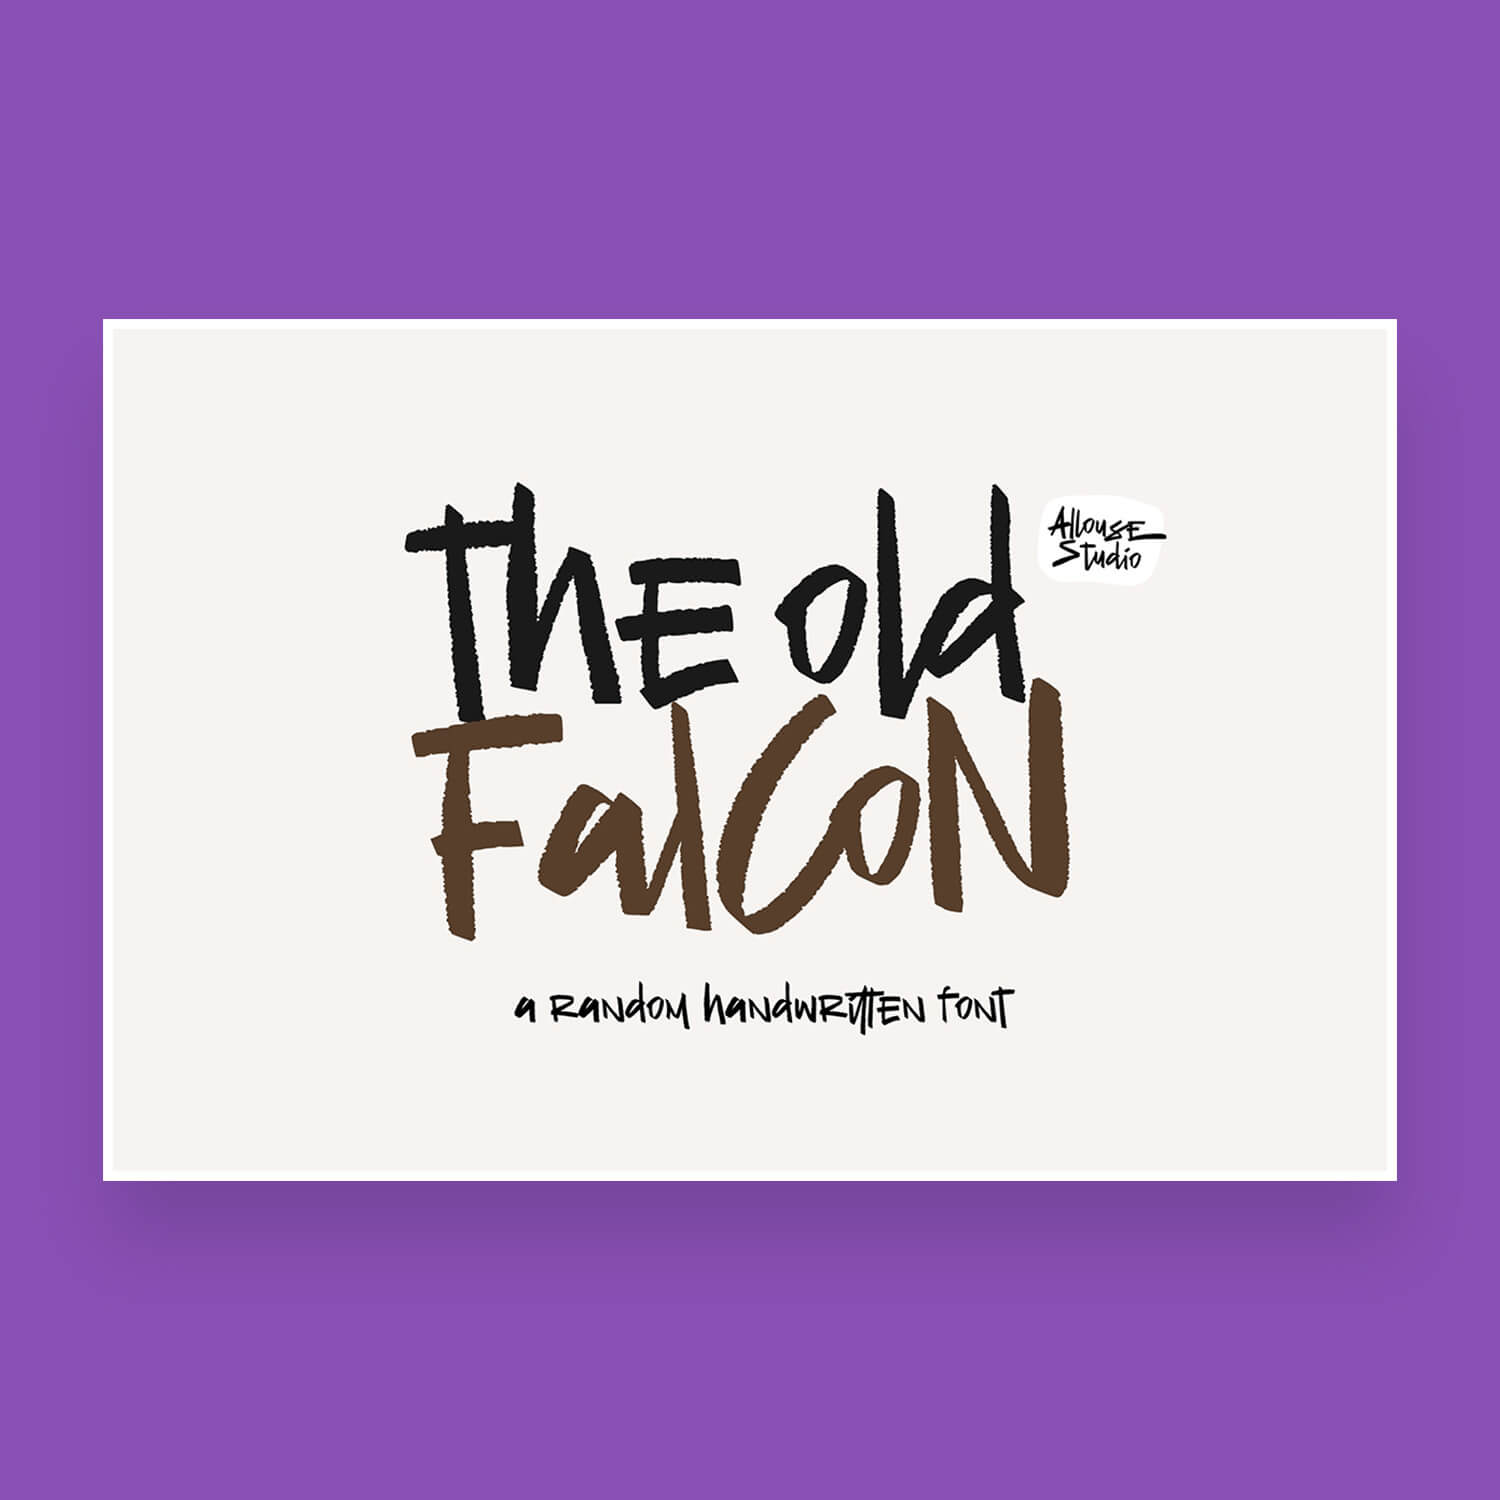 the old falcons random handwritten font cover image.